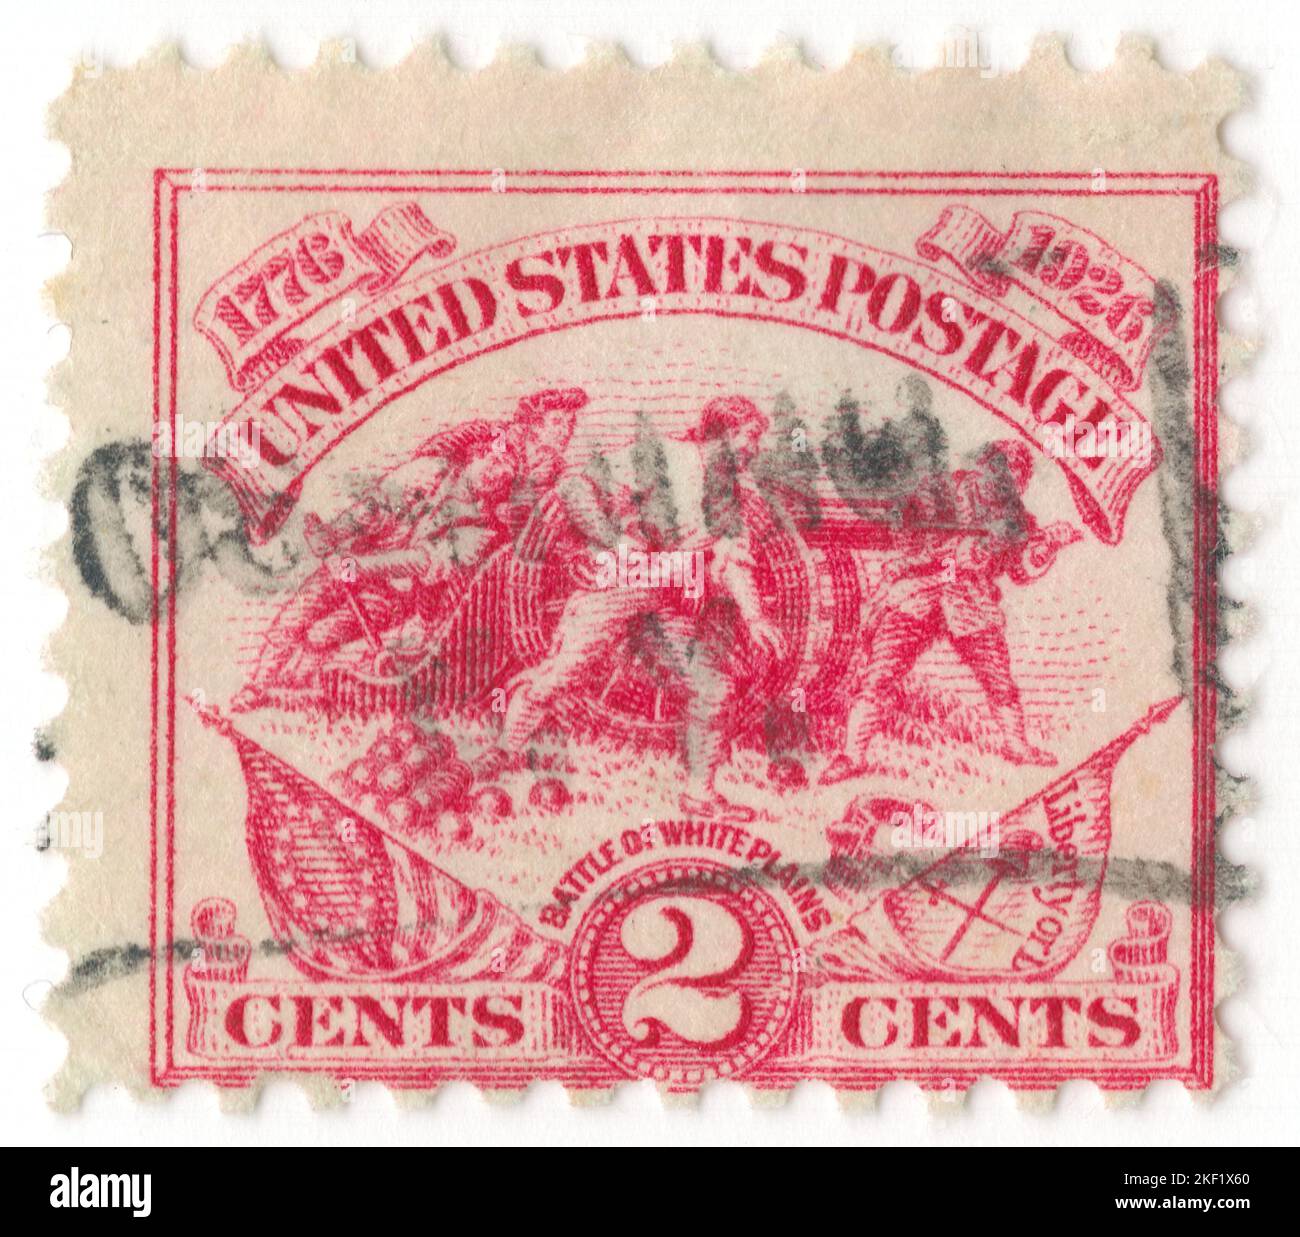 USA - 1926 October 18: An 2 cents carmine-rose postage stamp depicting Alexander Hamilton’s Battery. Battle of White Plains, New York, 150th anniversary. The Battle of White Plains was a battle in the New York and New Jersey campaign of the American Revolutionary War, fought on October 28, 1776 near White Plains, New York. Following the retreat of George Washington's Continental Army northward from New York City, British General William Howe landed troops in Westchester County, intending to cut off Washington's escape route Stock Photo